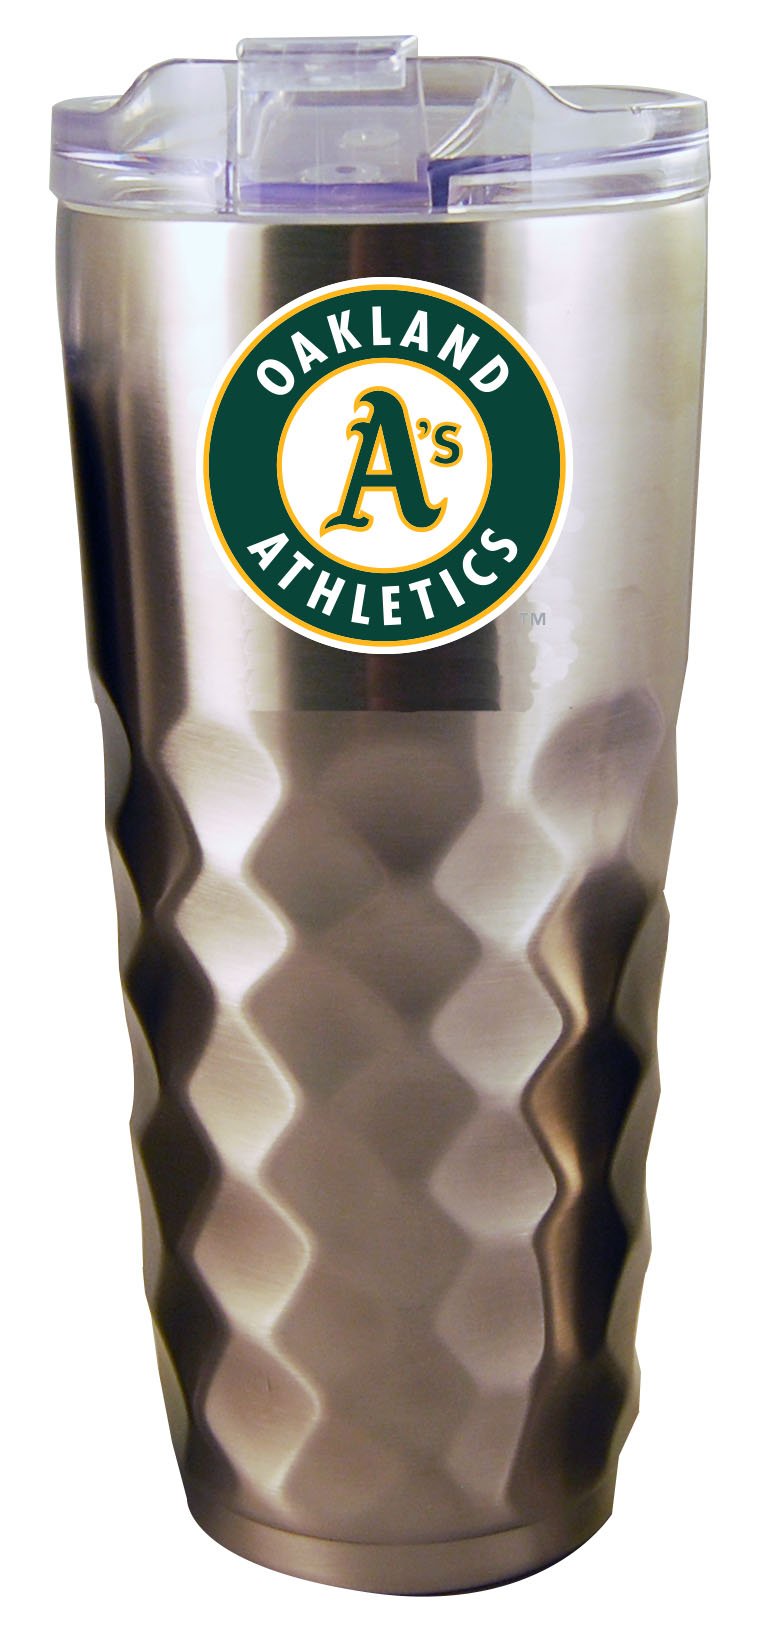 32oz Stainless Steel Diamond Tumbler | Oakland Athletics
CurrentProduct, Drinkware_category_All, MLB, Oakland Athletics, OAT
The Memory Company